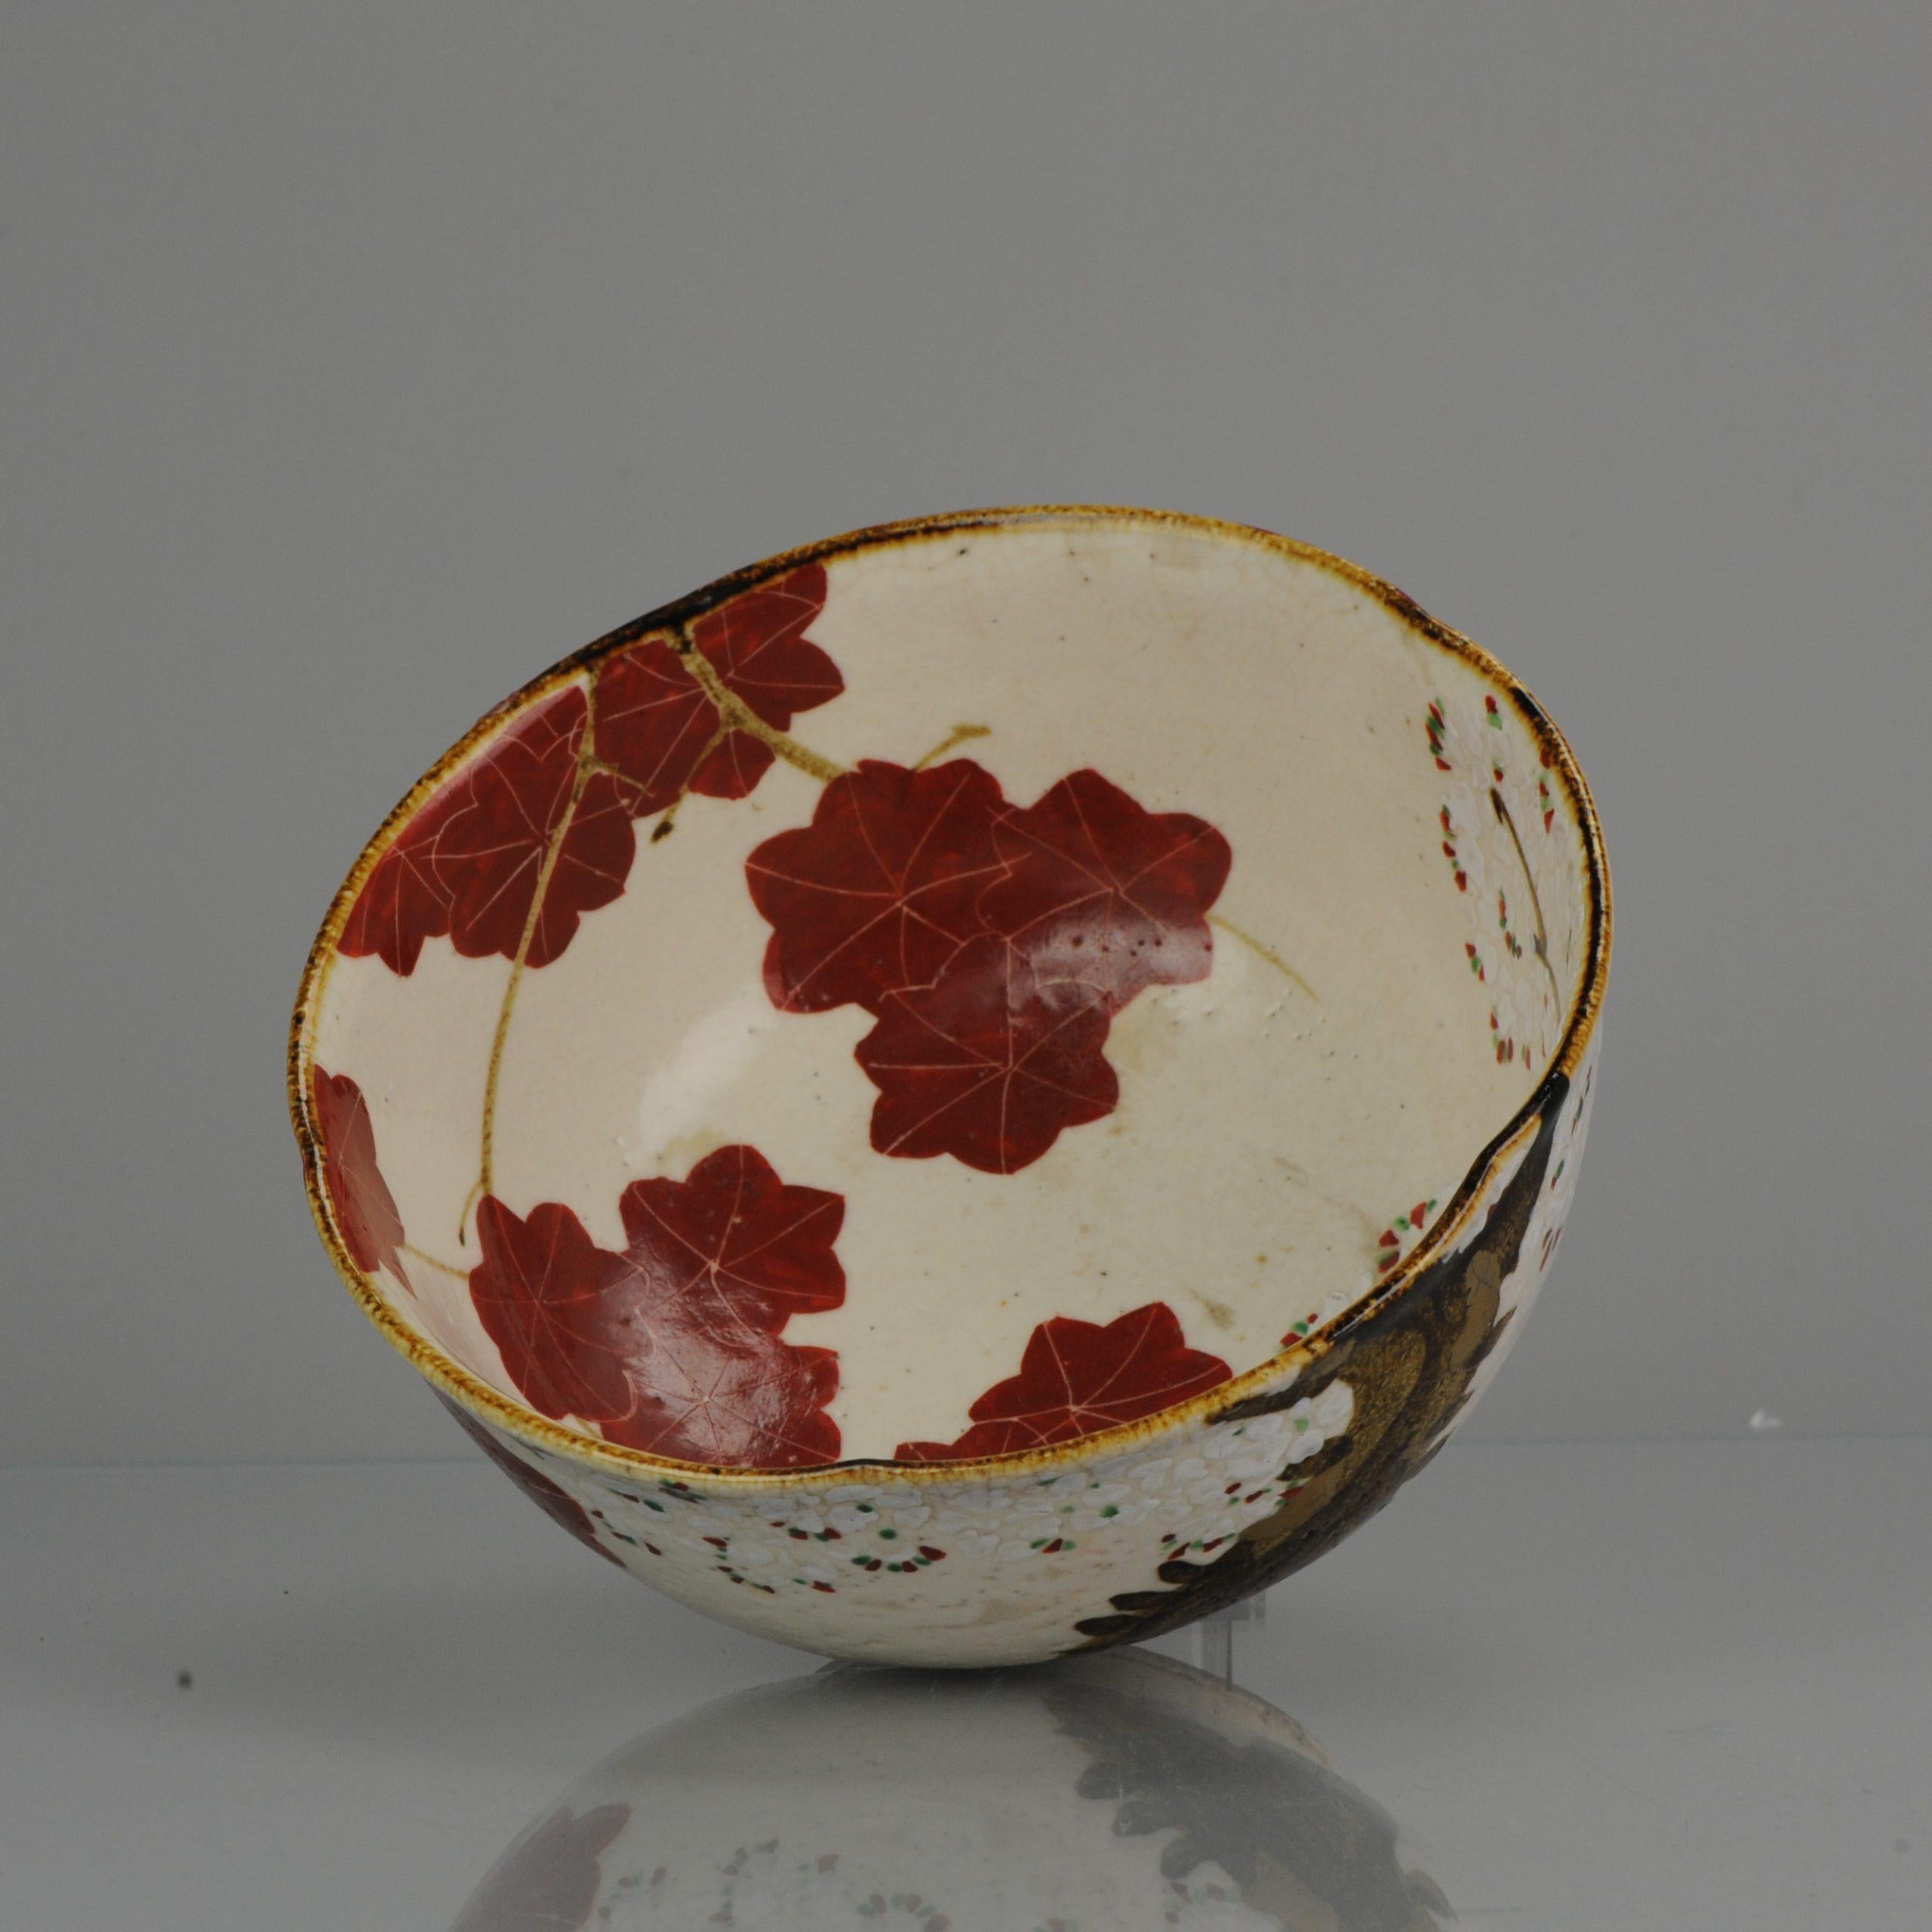 Description
A very nice and beautiful autumn bowl.

Condition
Perfect, just firing bubbles. Size: 190 x 95 mm D x H

Period
18th century
19th century.